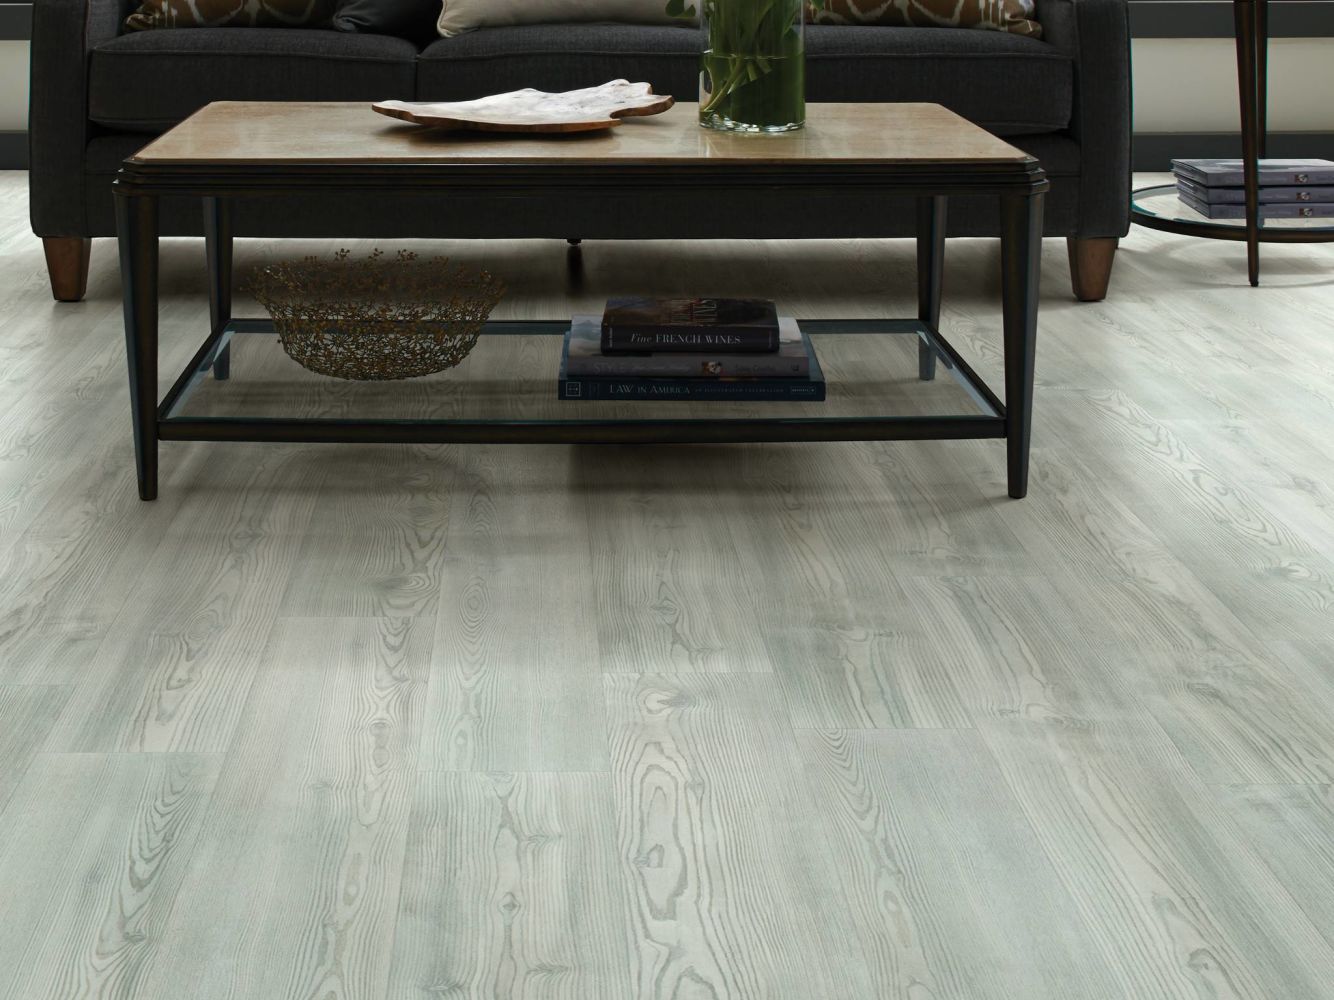 Shaw Floors Everest Willow Plus Clean Pine 05077_D102H